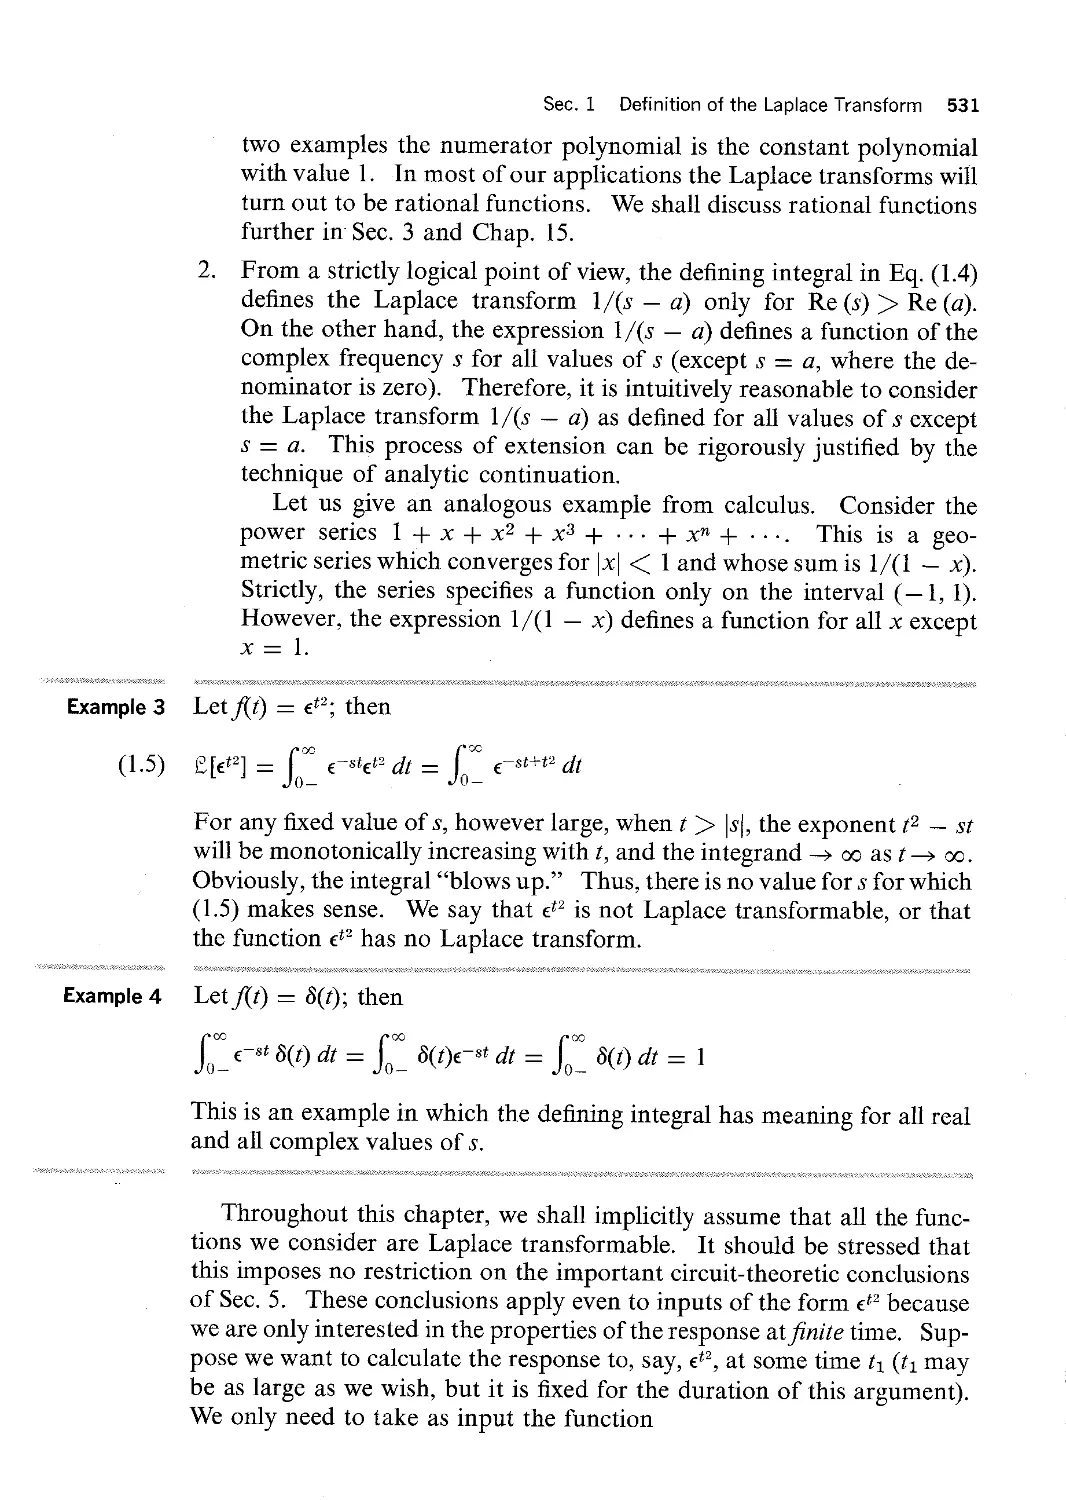 3 - Complete Response: Transient and Steady-state